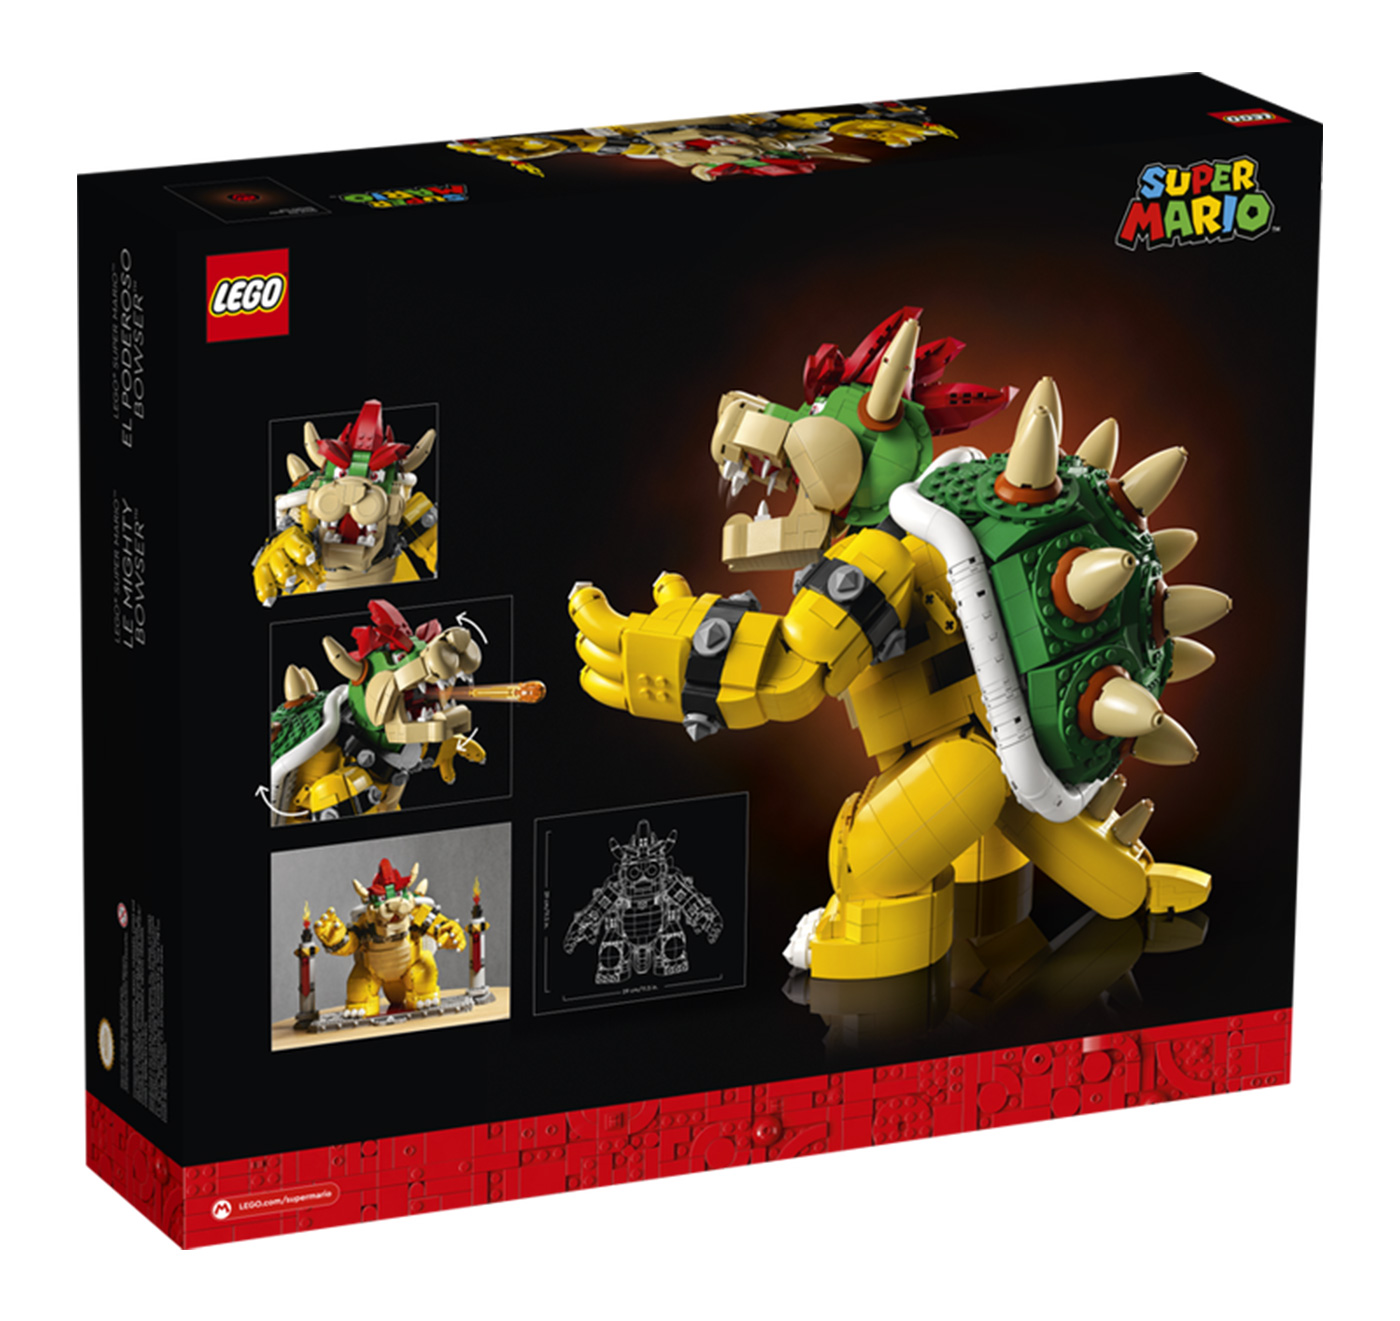 DiscussingFilm on X: LEGO has revealed the 14-foot tall Bowser on